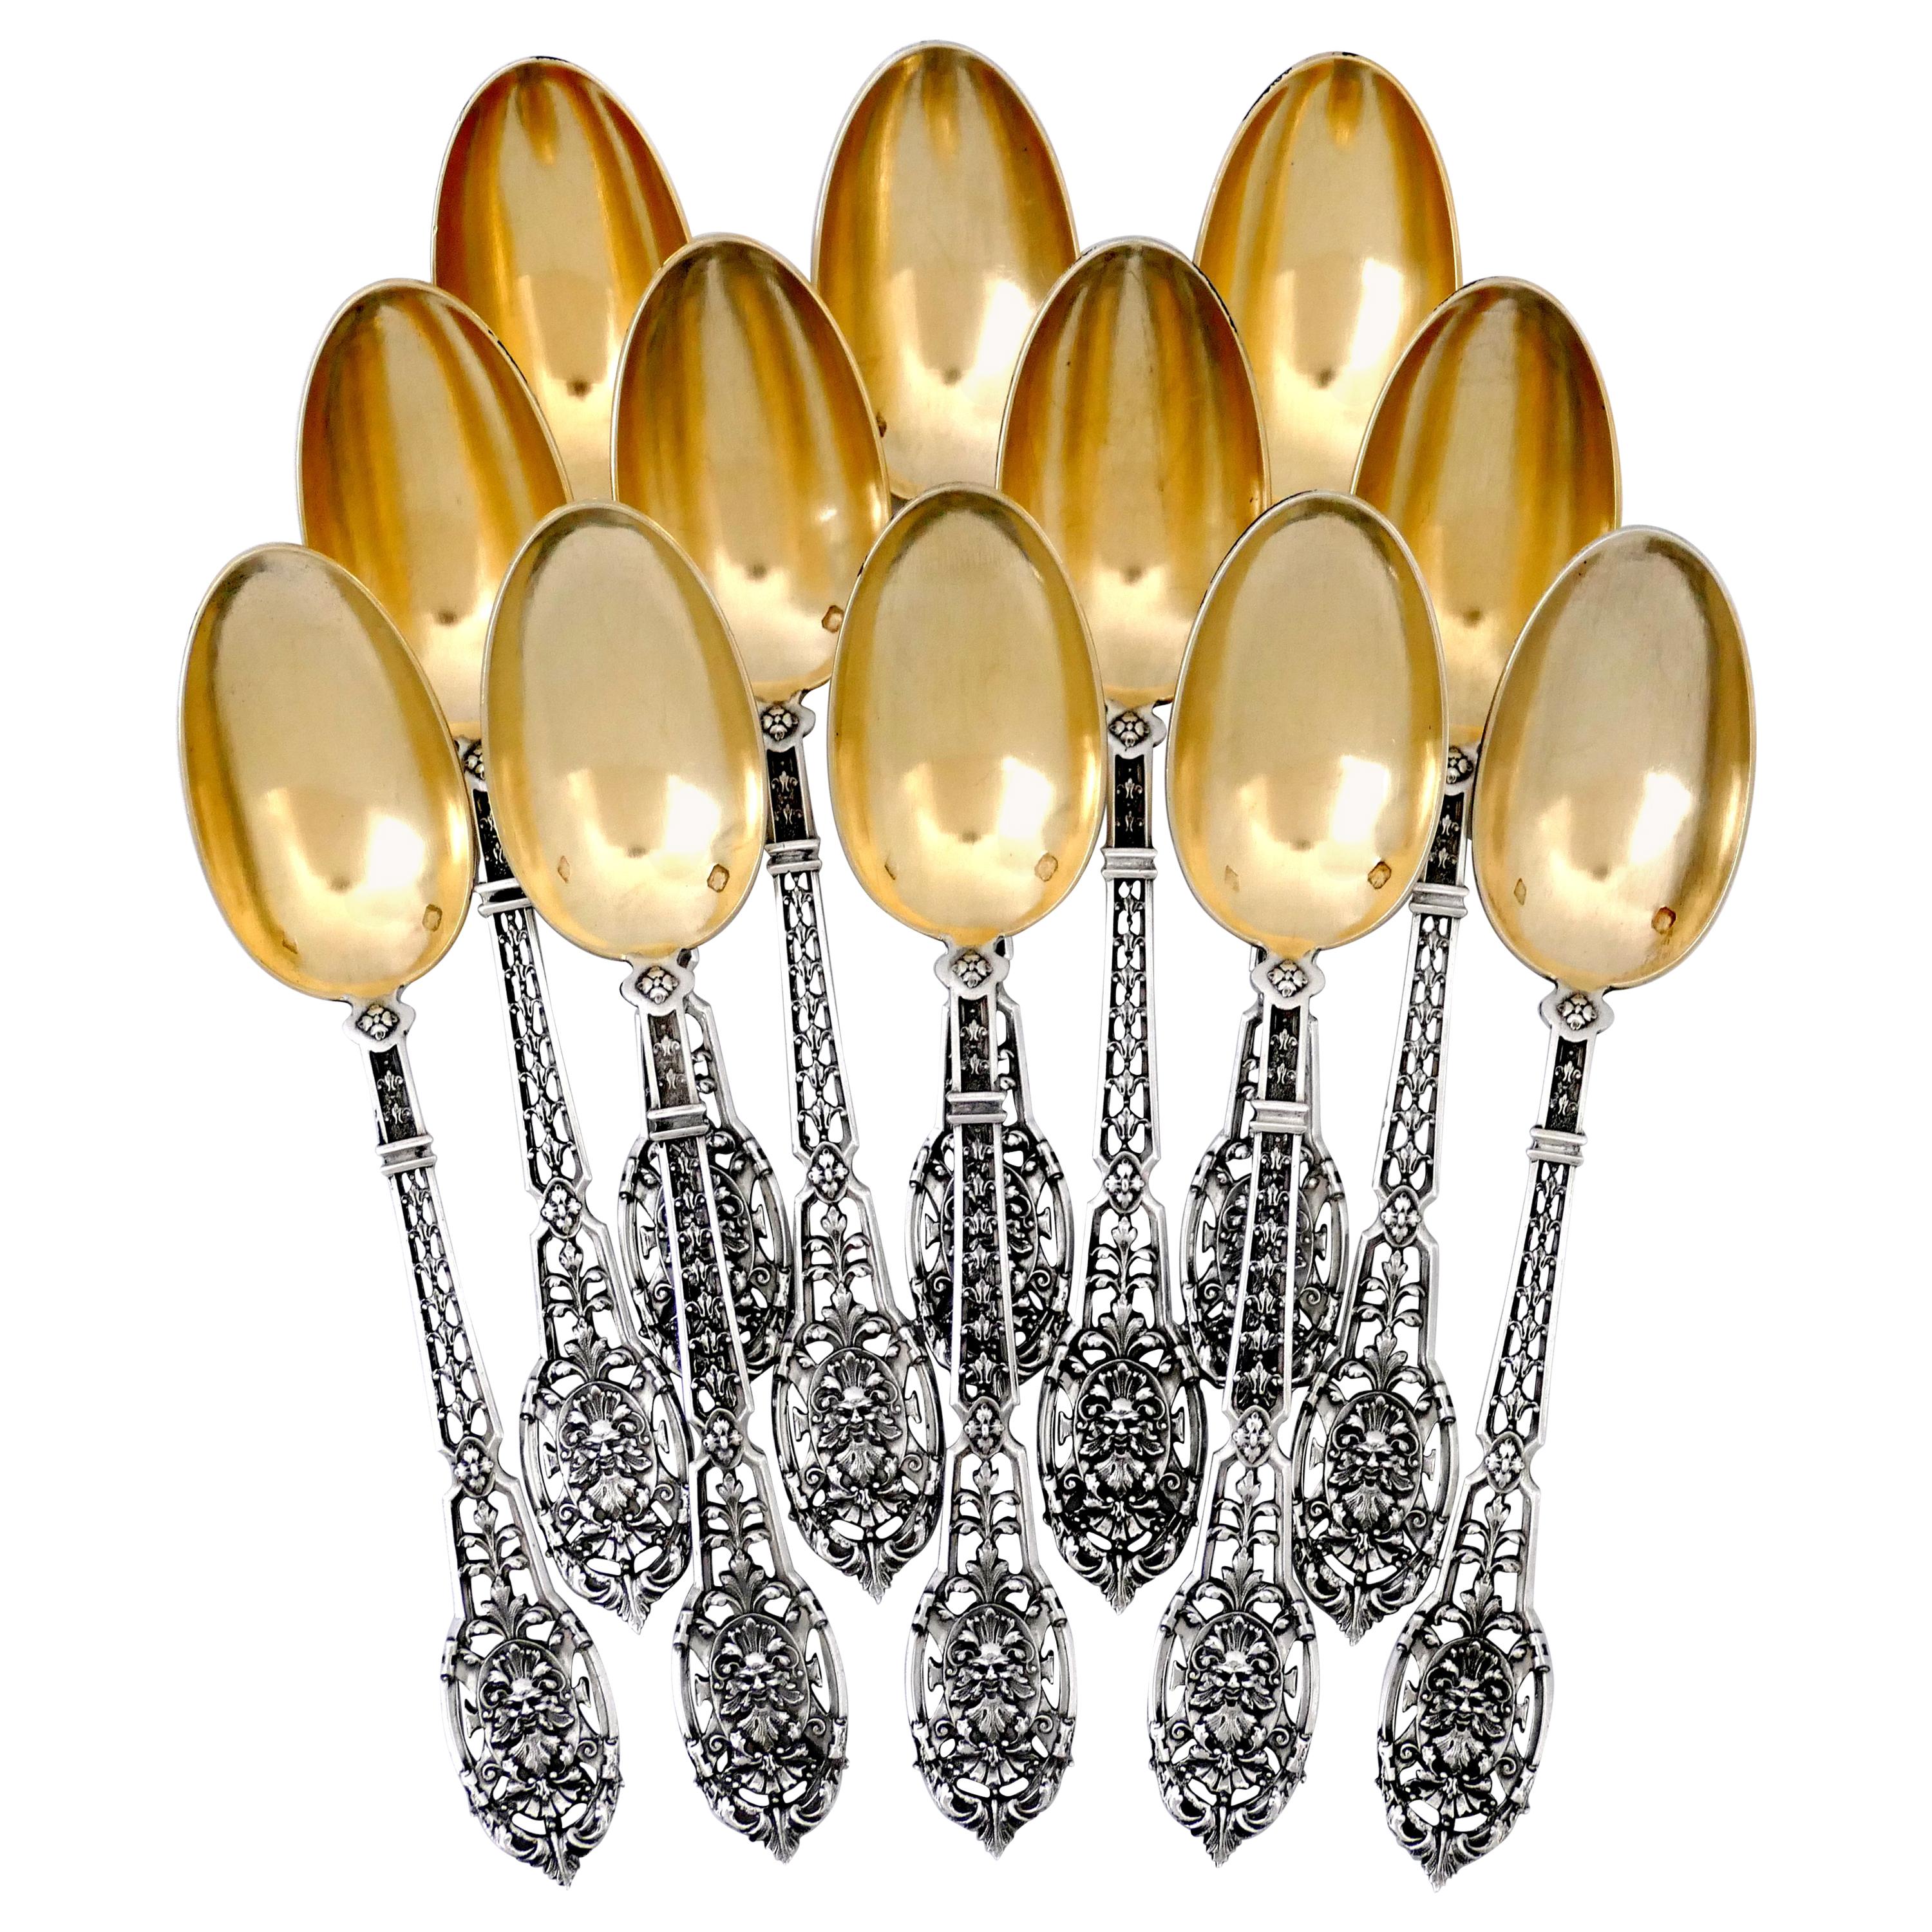 Puiforcat Masterpiece French Sterling Silver Tea, Coffee Spoons Set, Mascaron For Sale